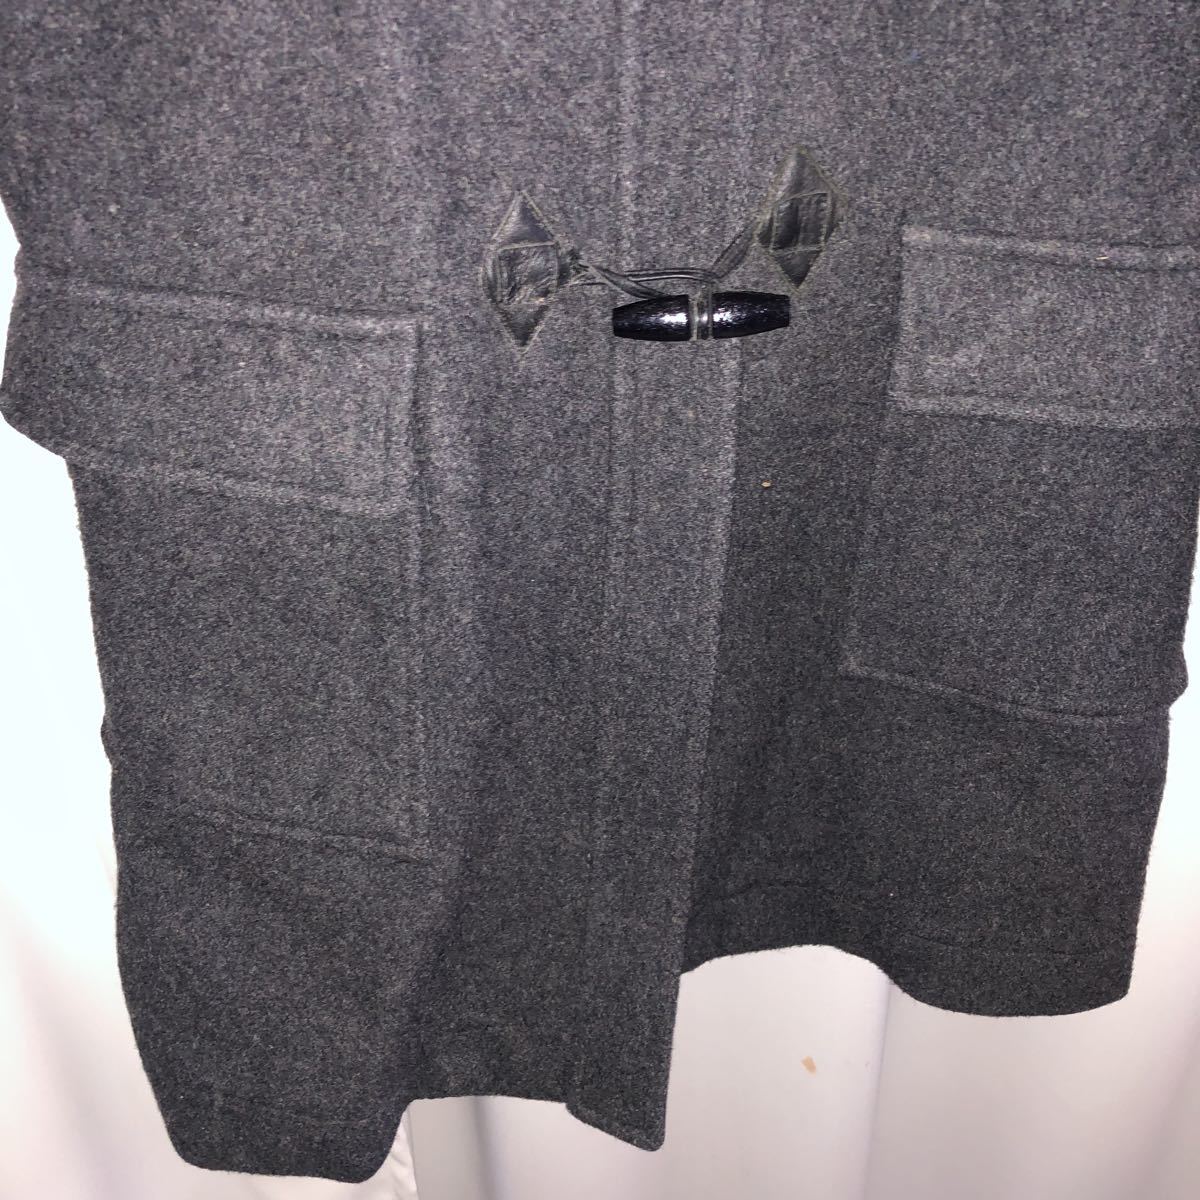  Cocue COCUE duffle coat charcoal gray beautiful goods M size 